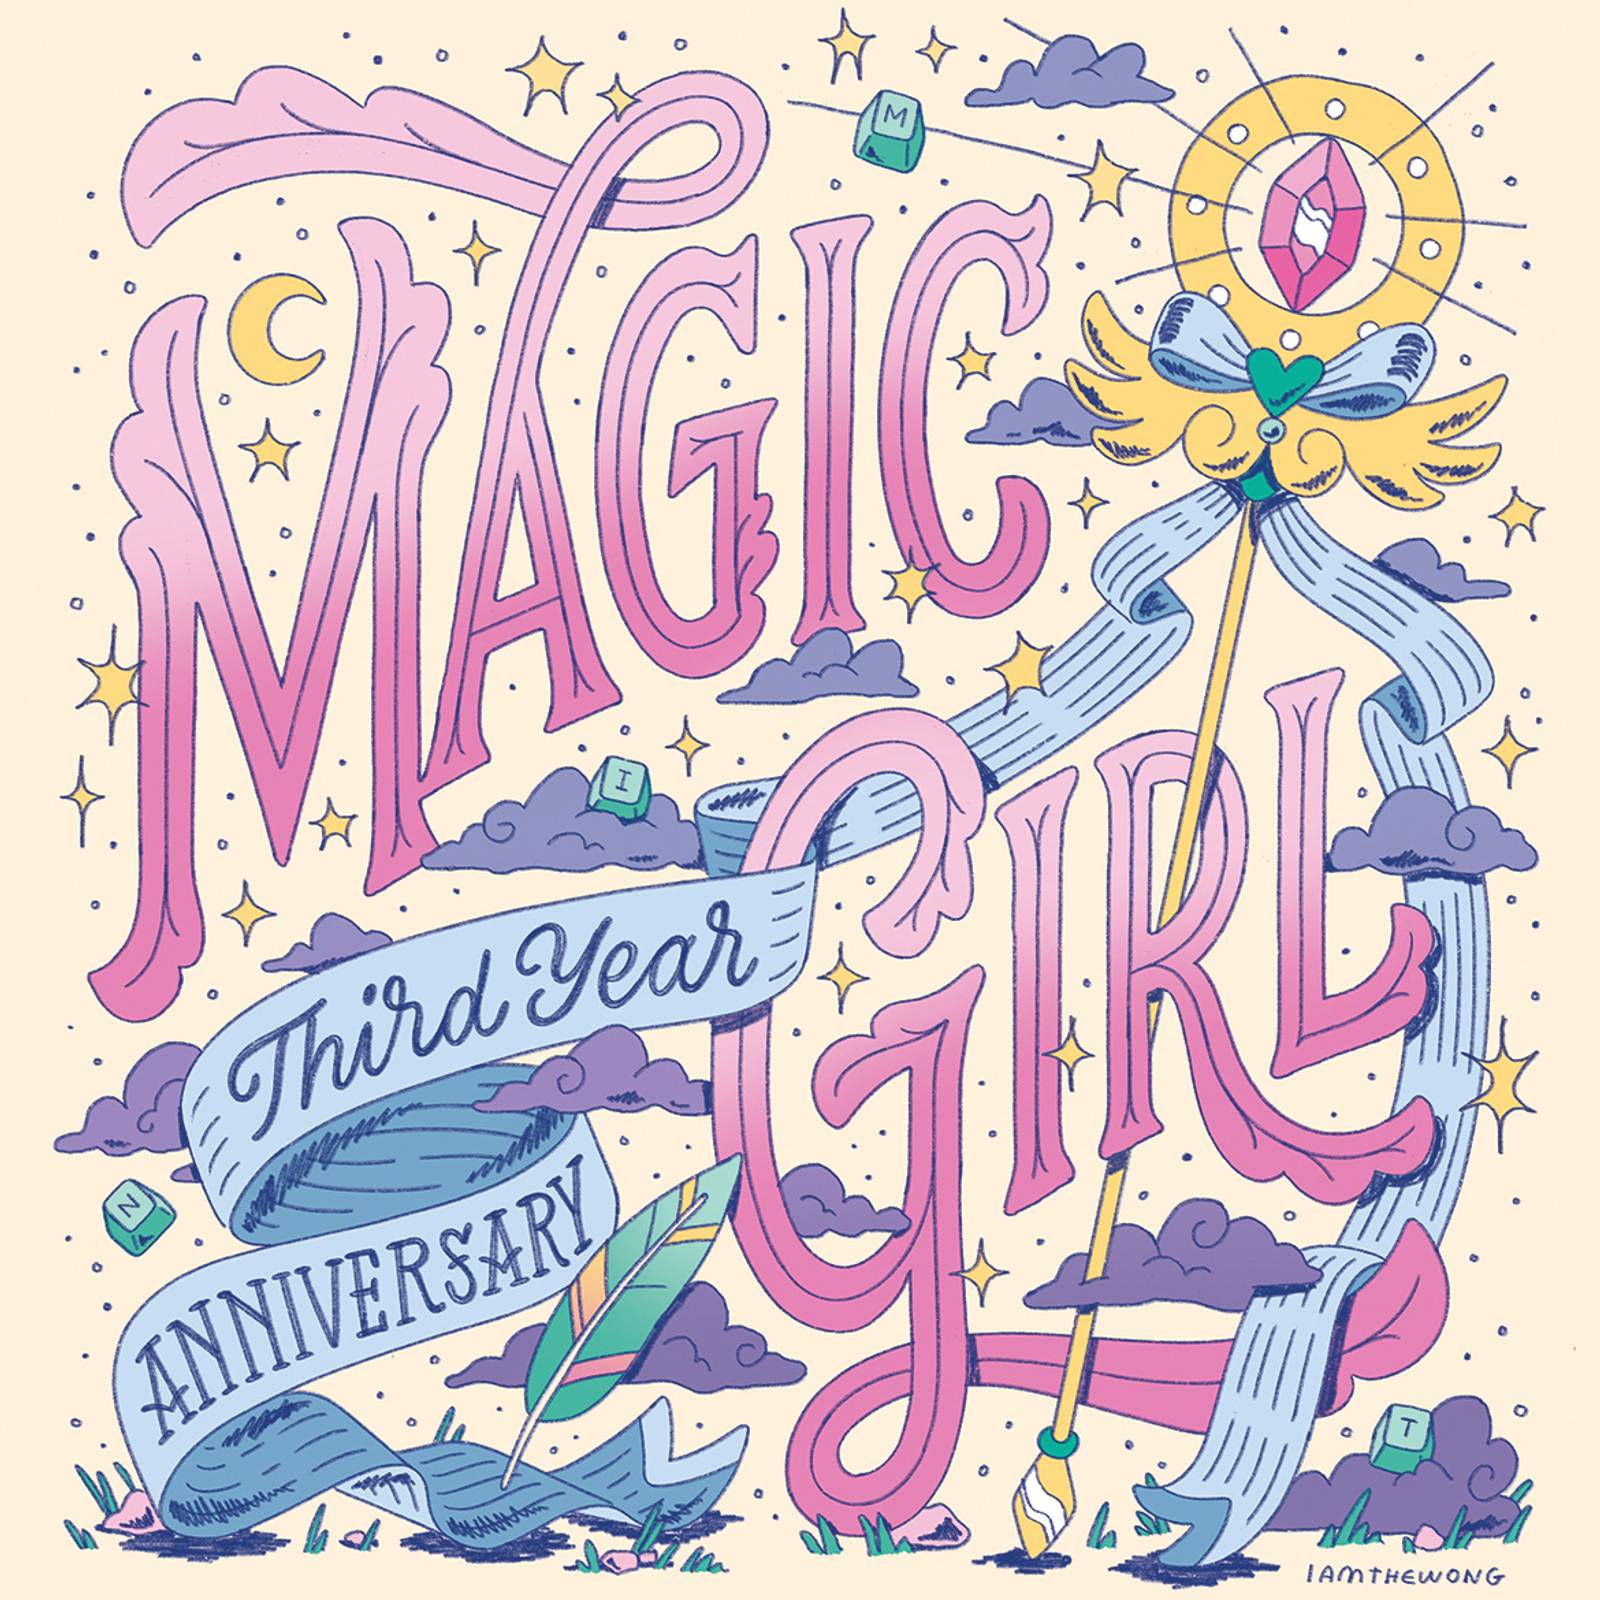 Magic Girl by Mintlodica lettering artwork by illustrator Matthew Wong celebration the third anniversary collectibles including boxes, postcards, and stickers. Featuing cute ribbons, wings, magic staff, moons, stars, and a feather.

